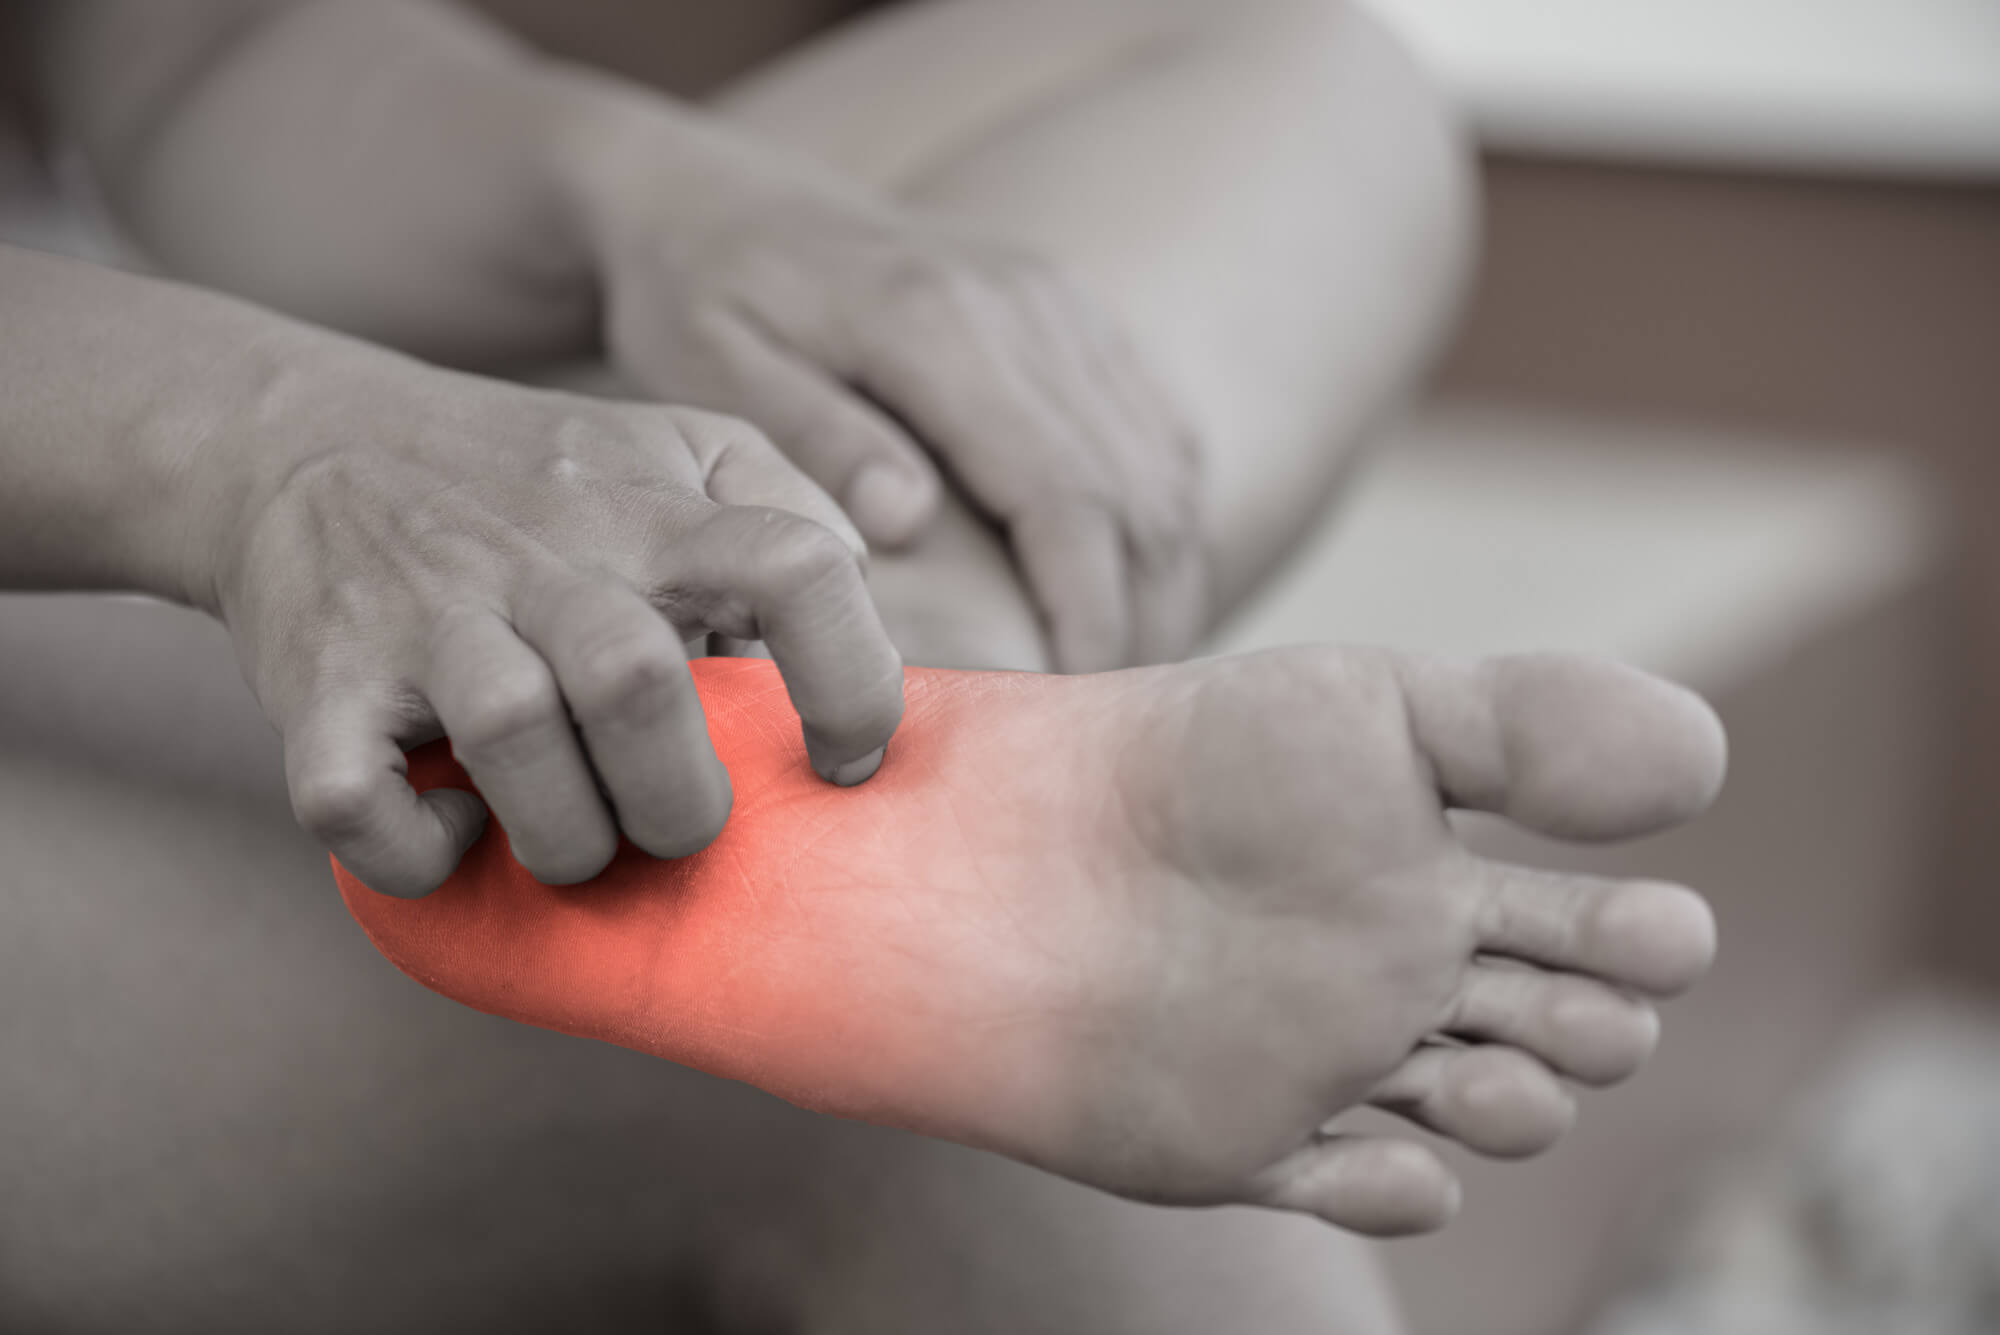 Itchy lower legs: Causes, other symptoms, and relief